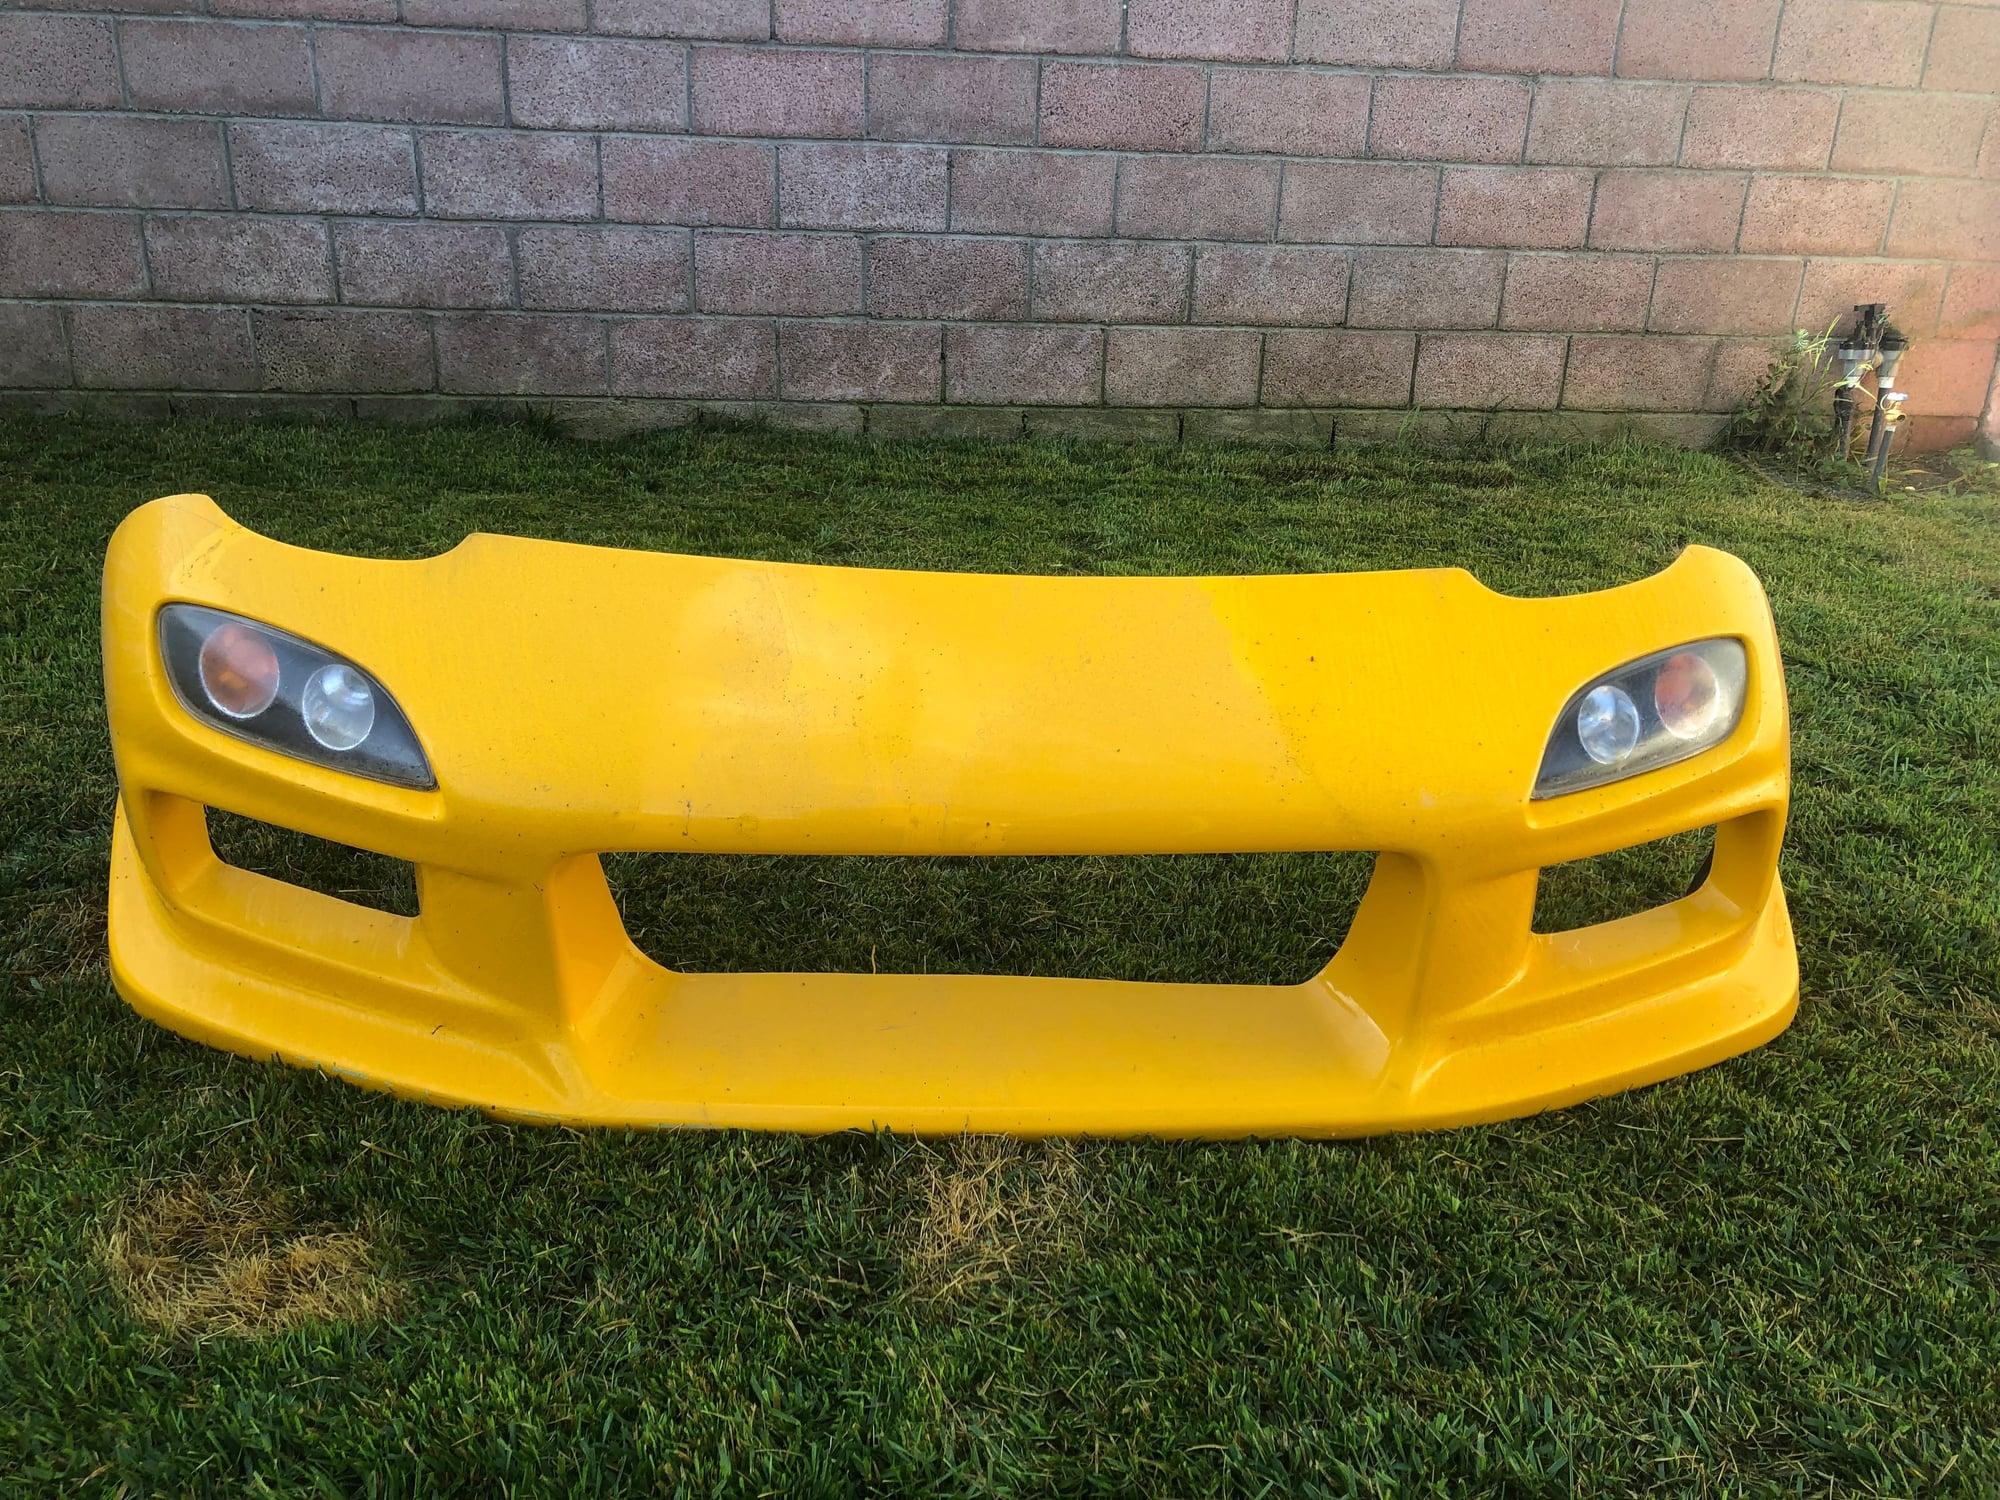 Exterior Body Parts - GTP International fiberglass body kit with OEM fenders - Used - 1993 to 2002 Mazda RX-7 - Long Beach, CA 90808, United States